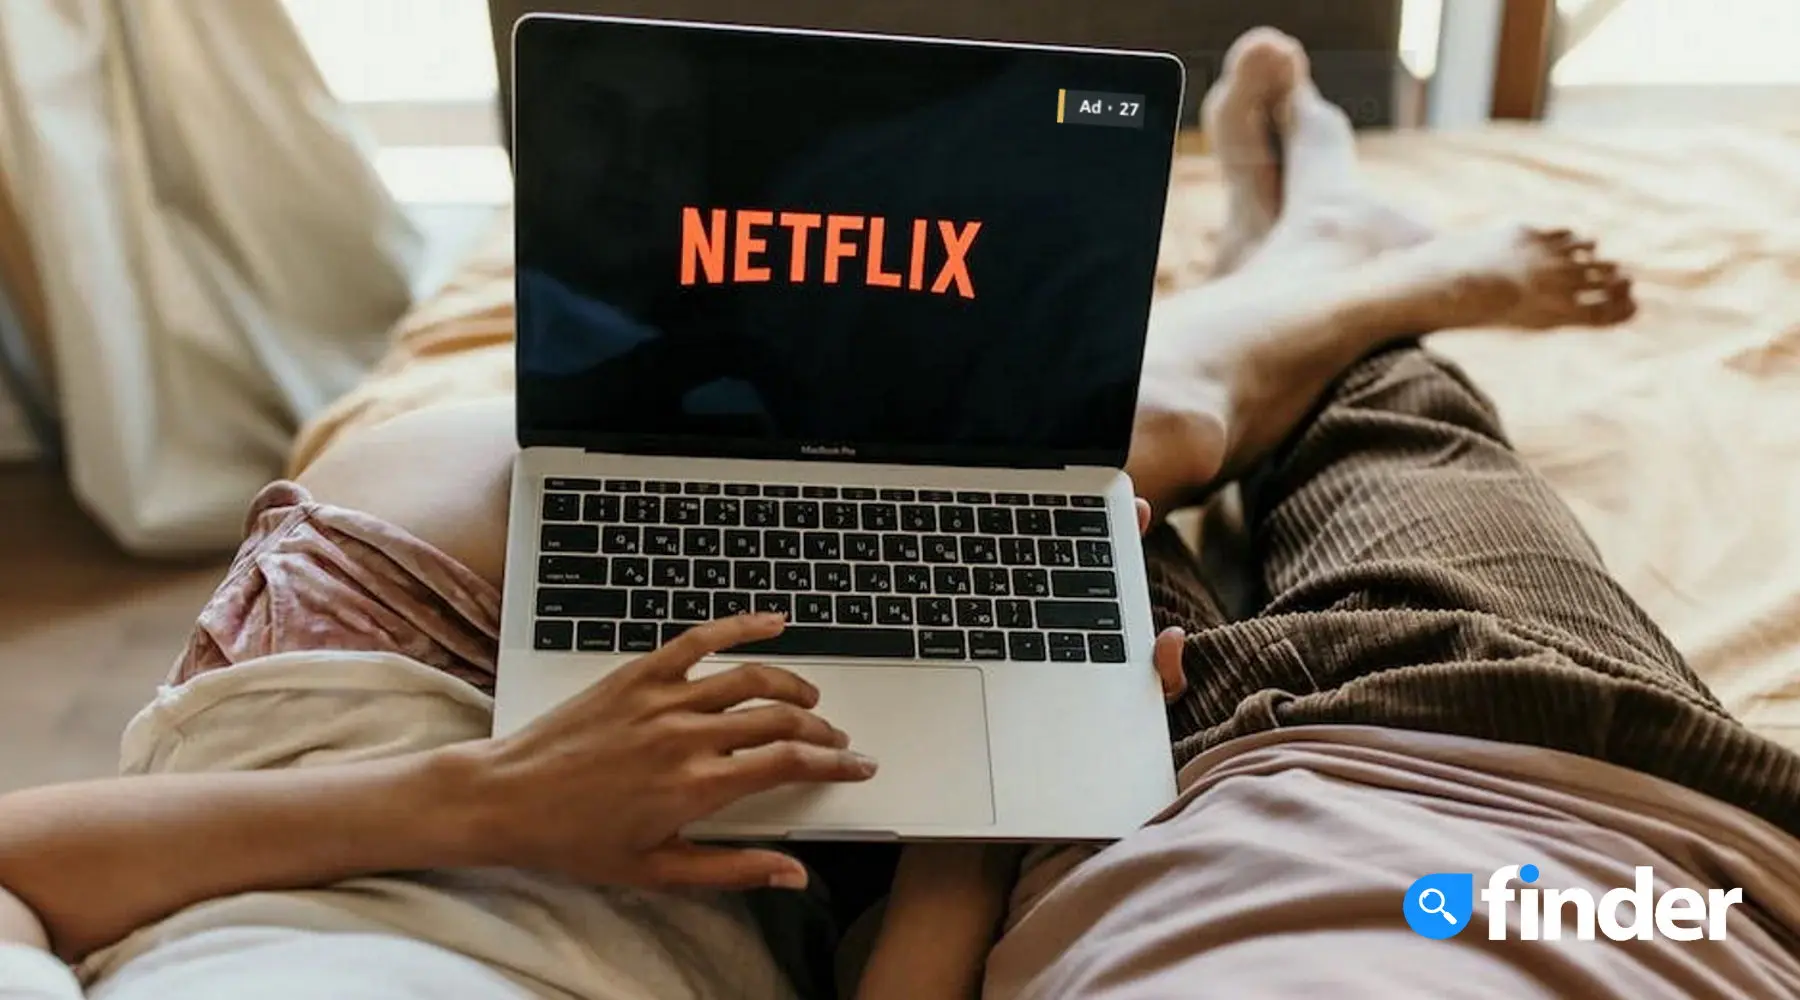 Cheaper Netflix with ads is now available: Is it worth it?